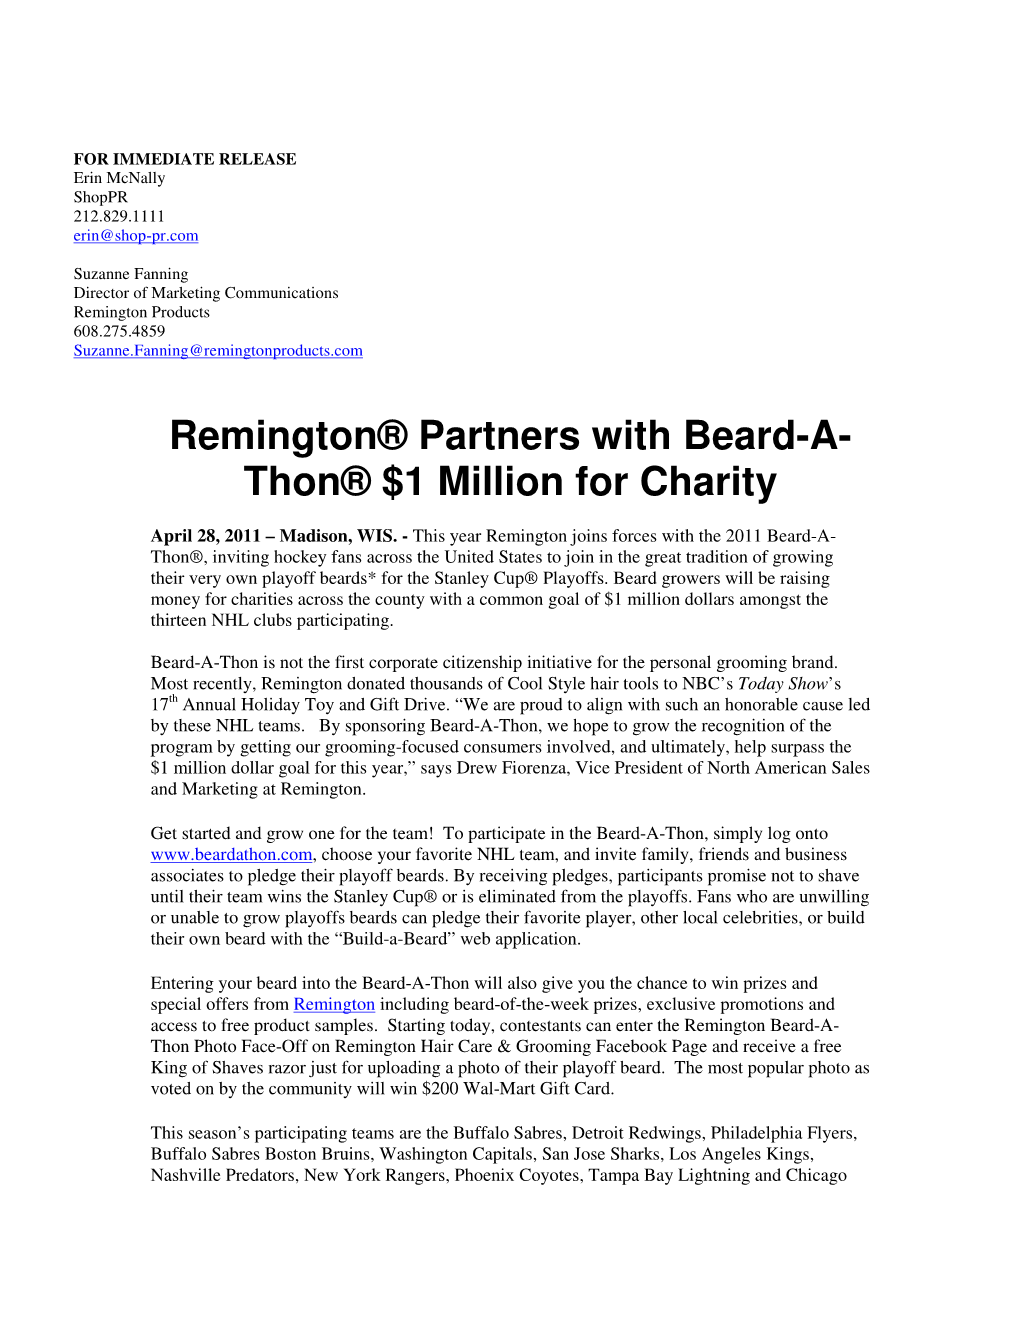 Remington® Partners with Beard-A- Thon® $1 Million for Charity